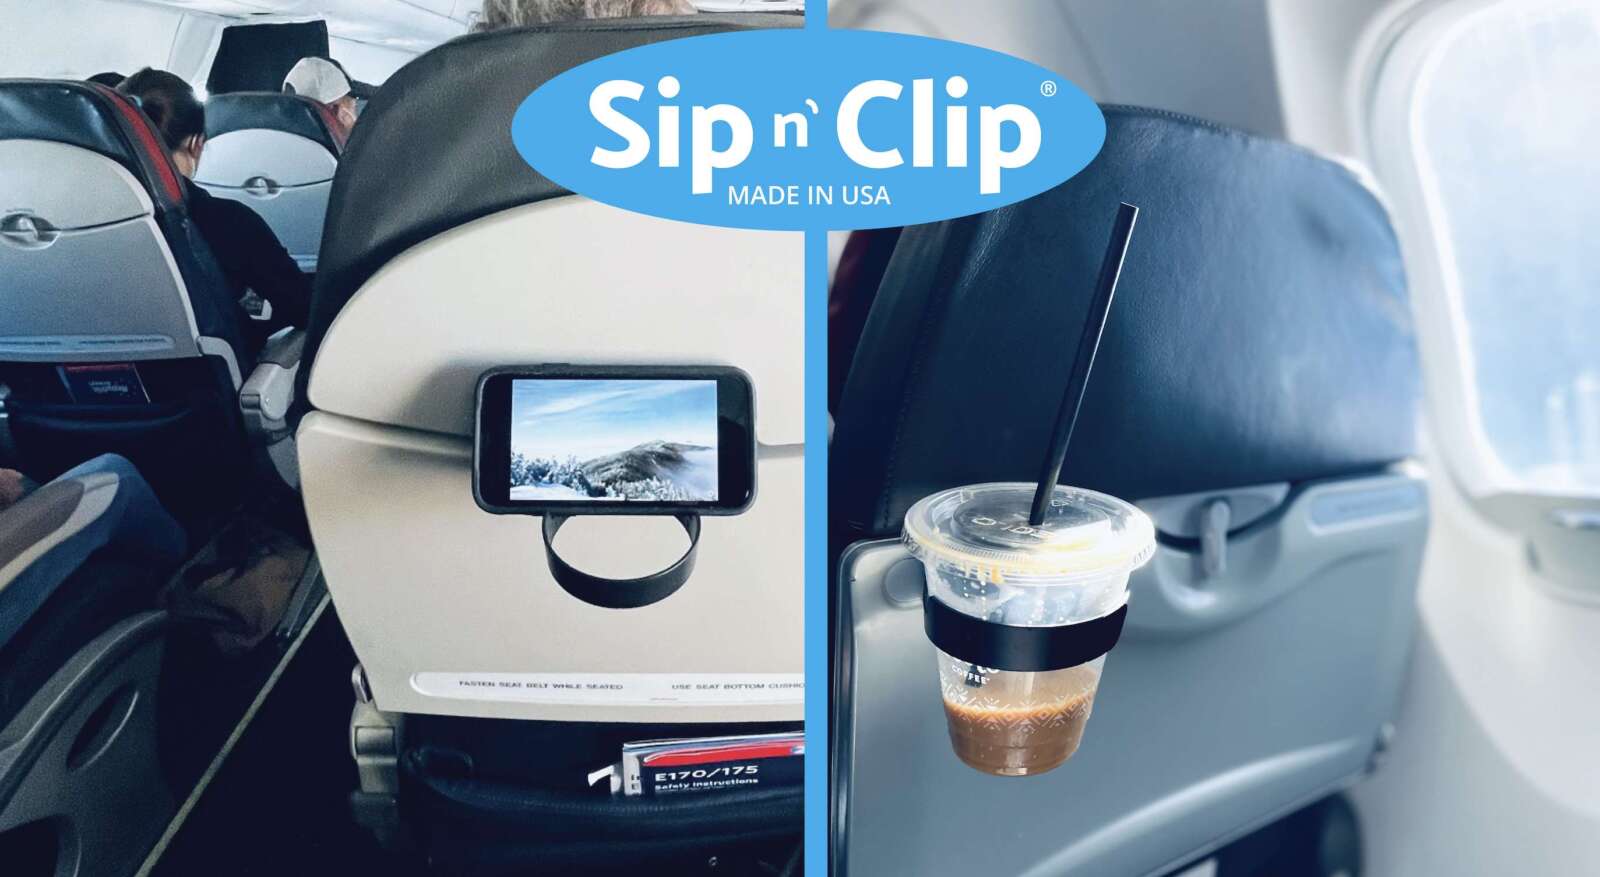 Clarendon resident launches portable airplane seat cup holder